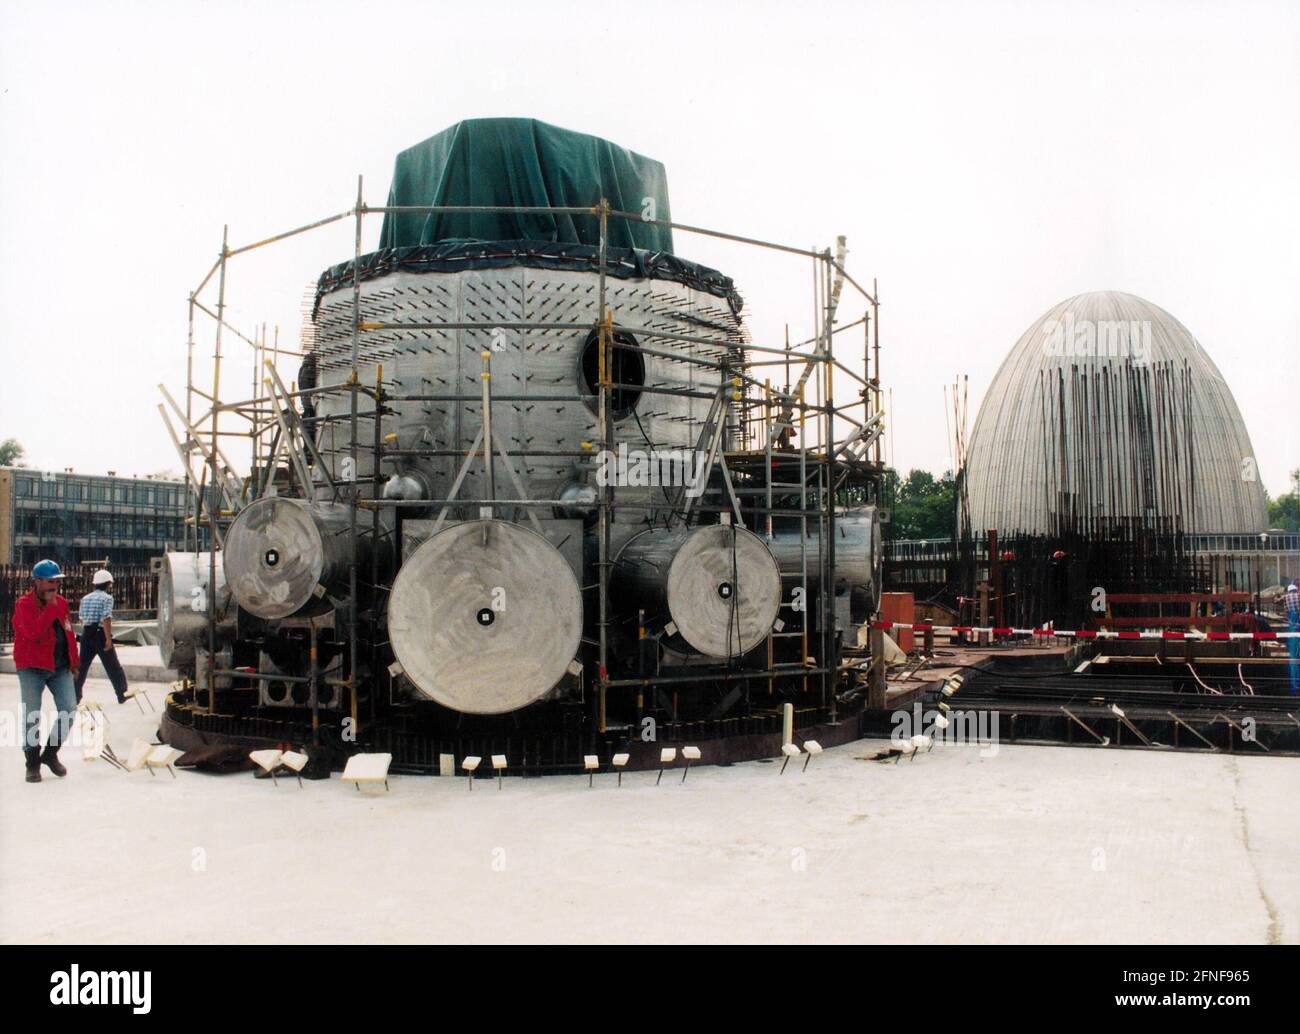 'Date of photograph: 09.06.1997 The new research reactor of the Technical University in Munich is being built against the background of the old ''atomic egg''. [automated translation]' Stock Photo